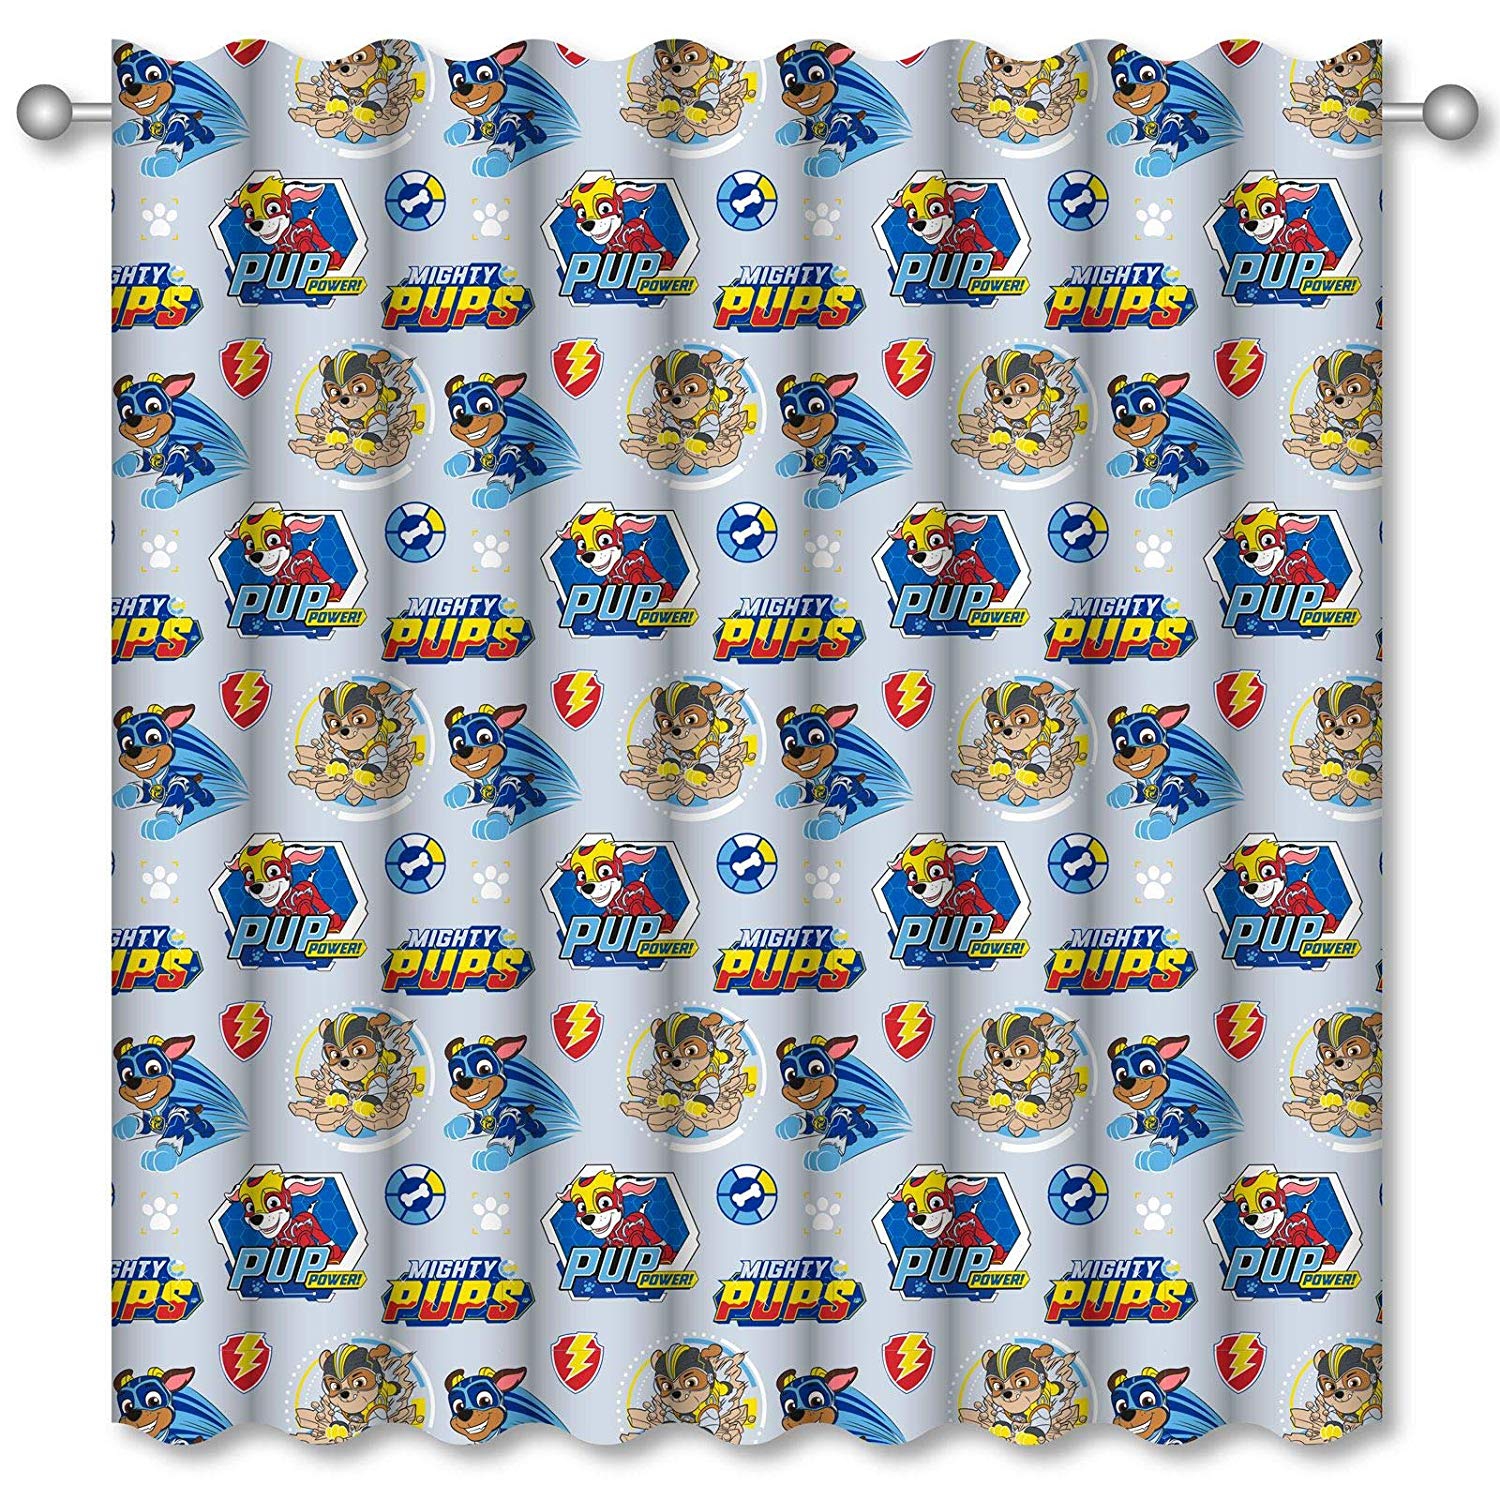 Official Paw Patrol Super Mighty Pups 66 X 72 inch Drop Curtain Pair